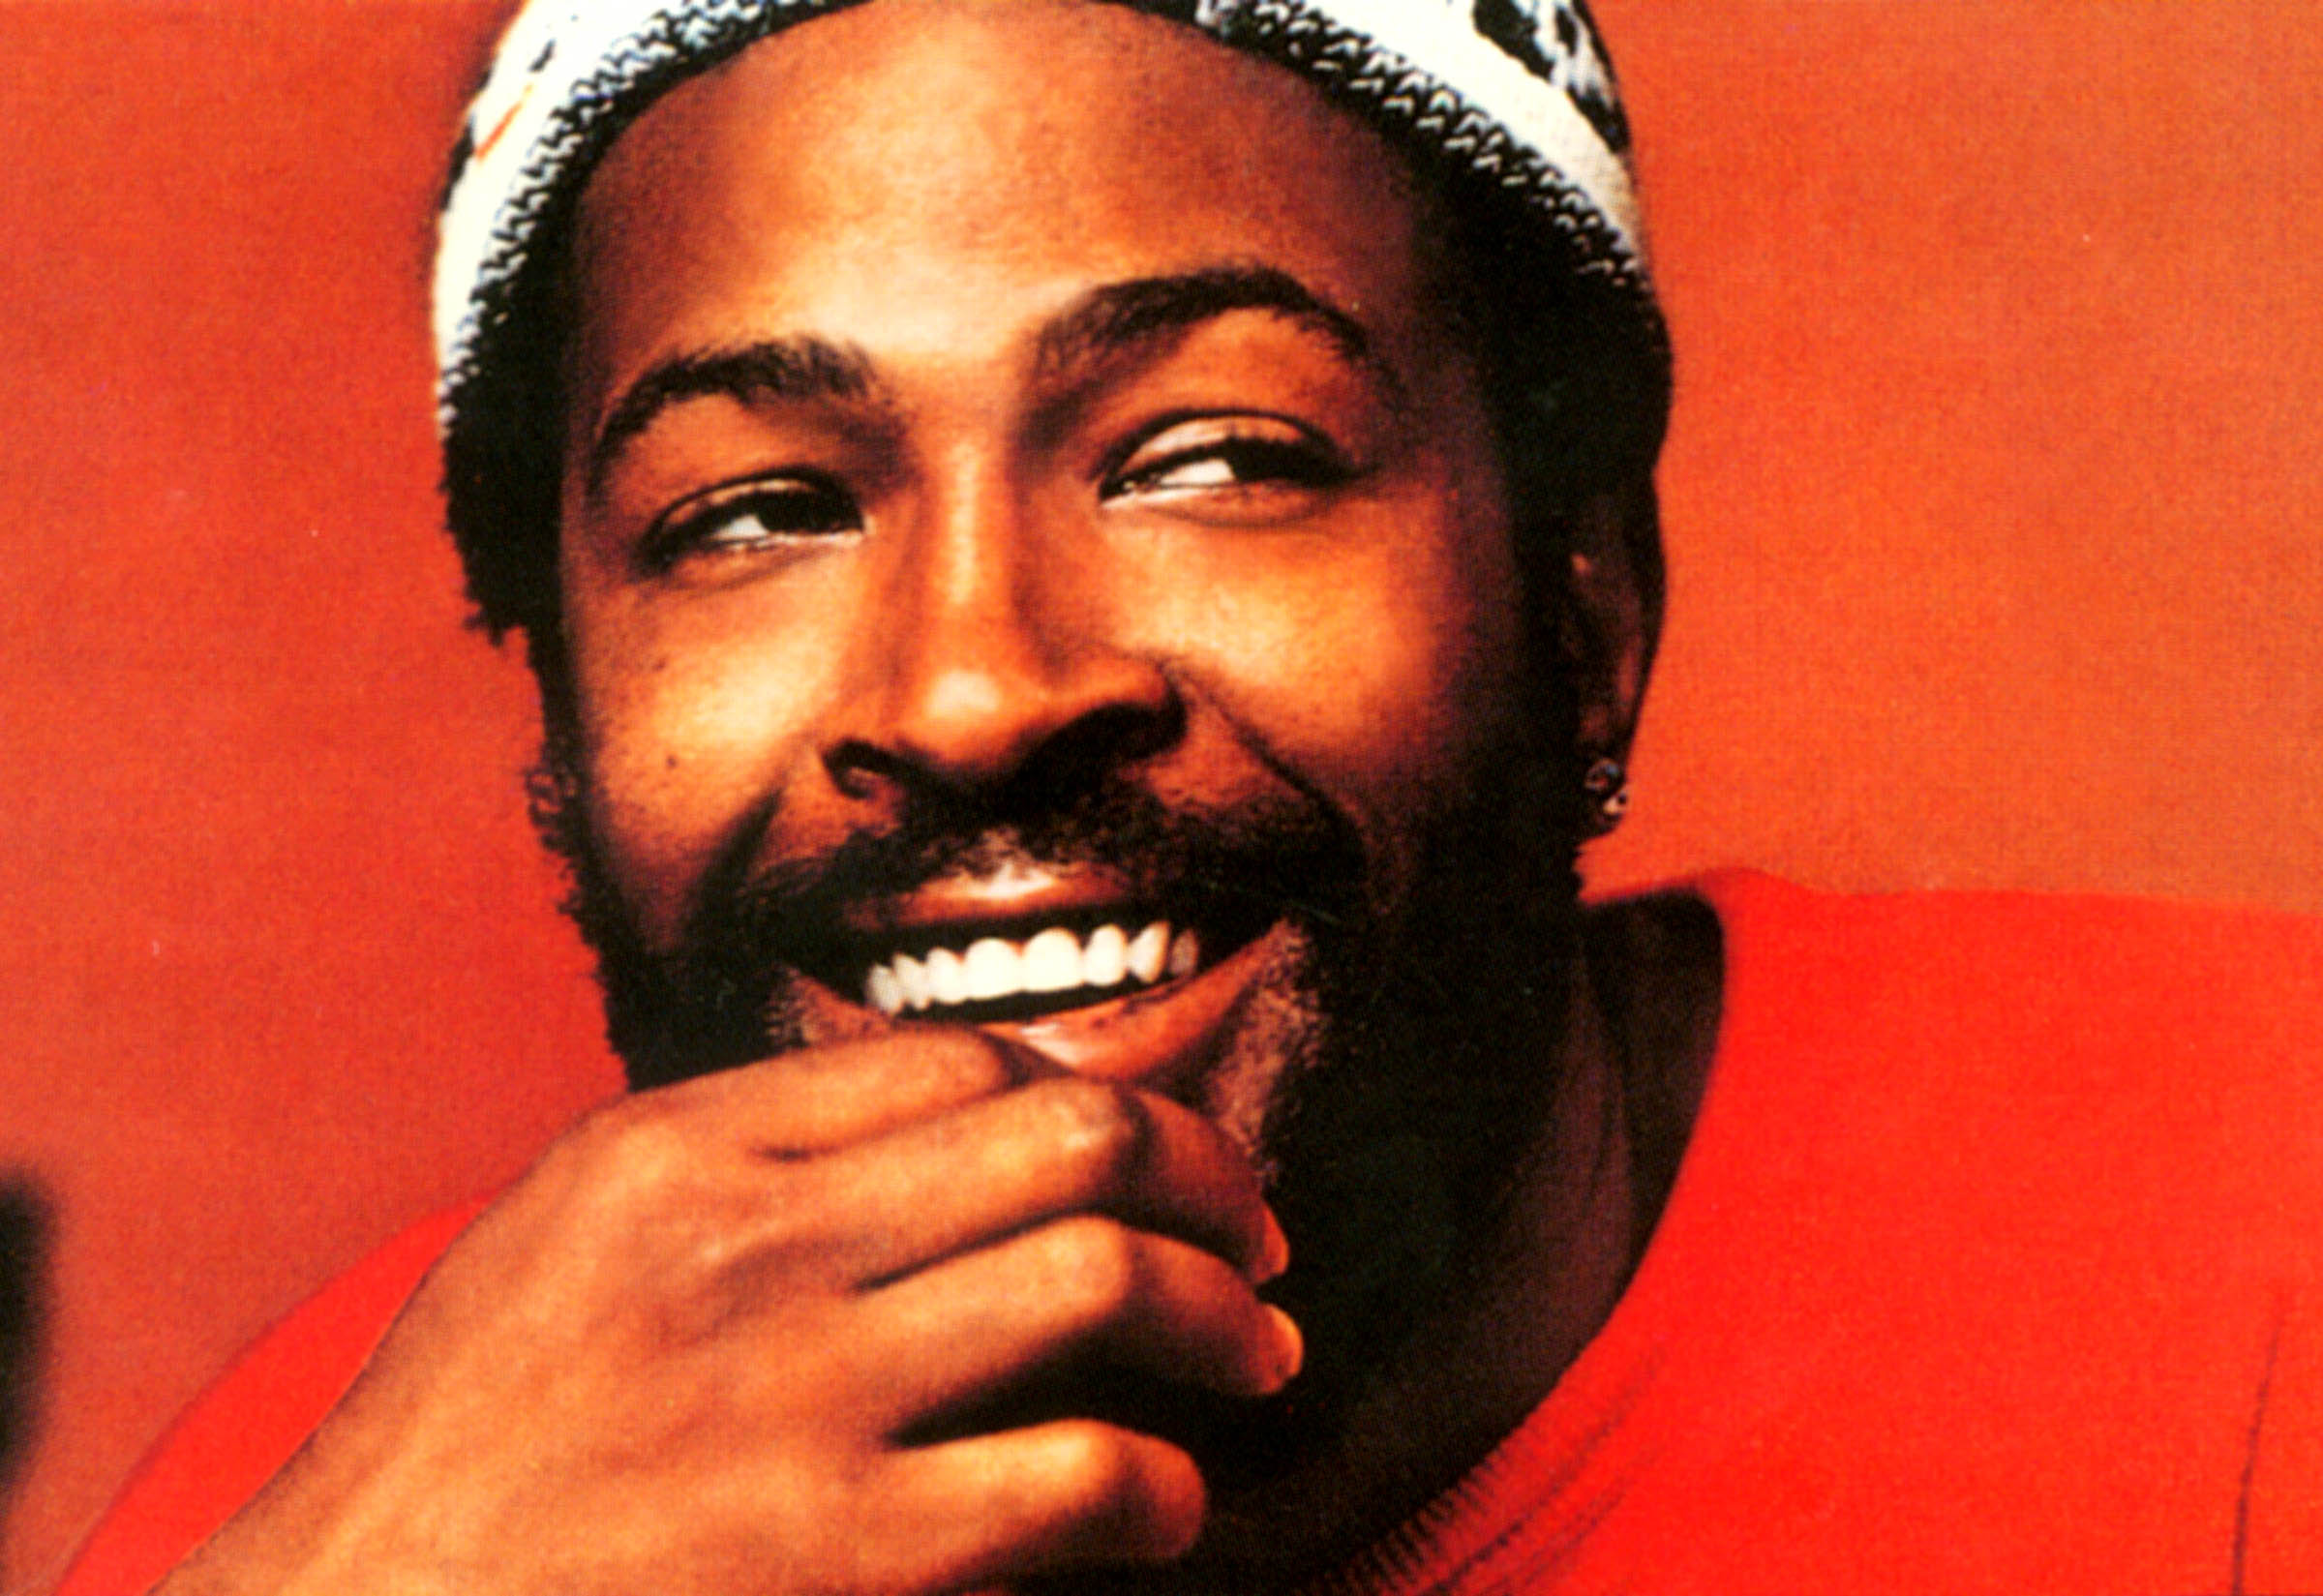 Marvin Gaye, “Got To Give It Up”